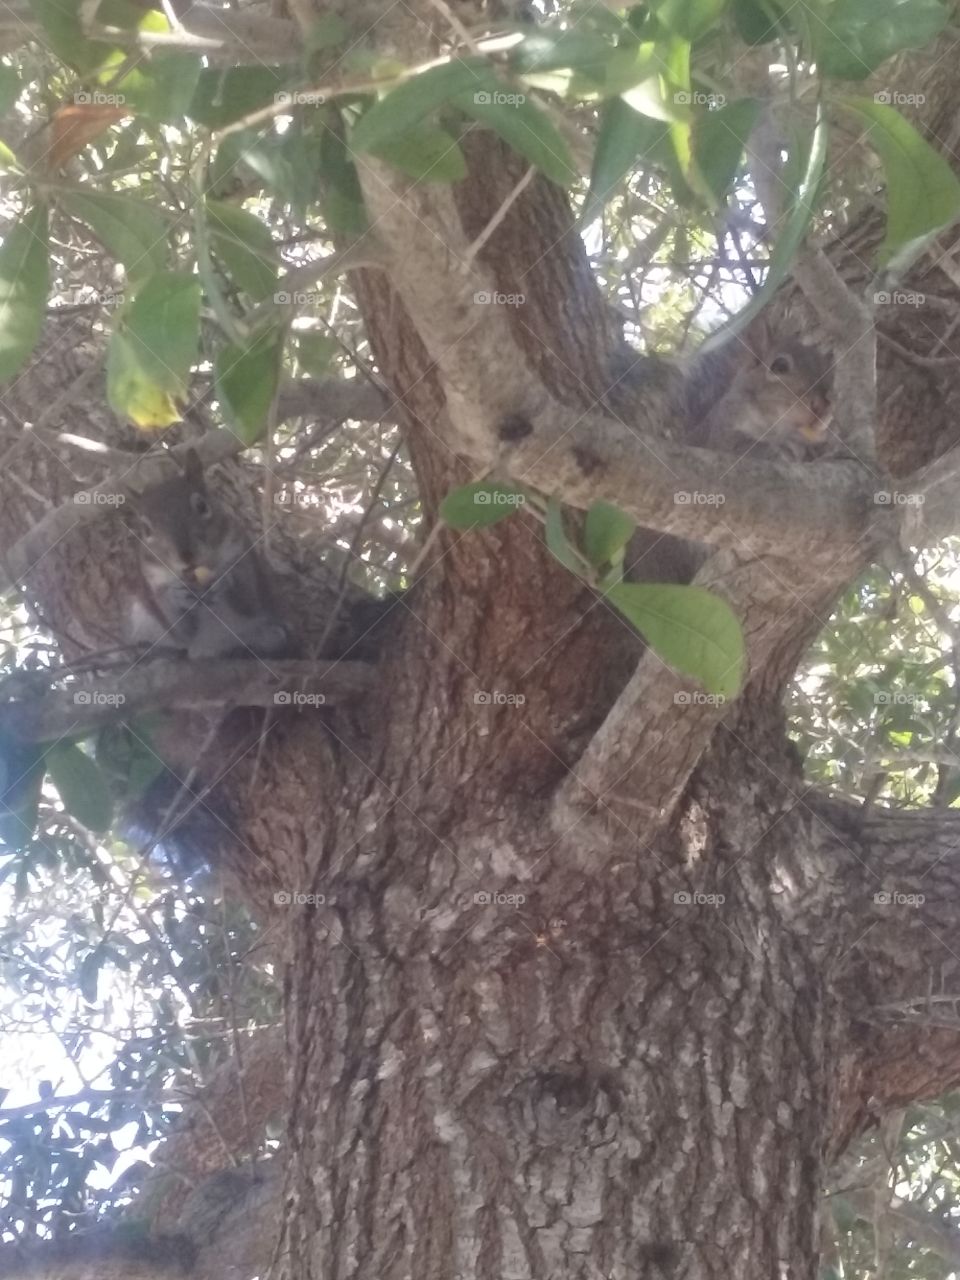 squirrel eating in tree